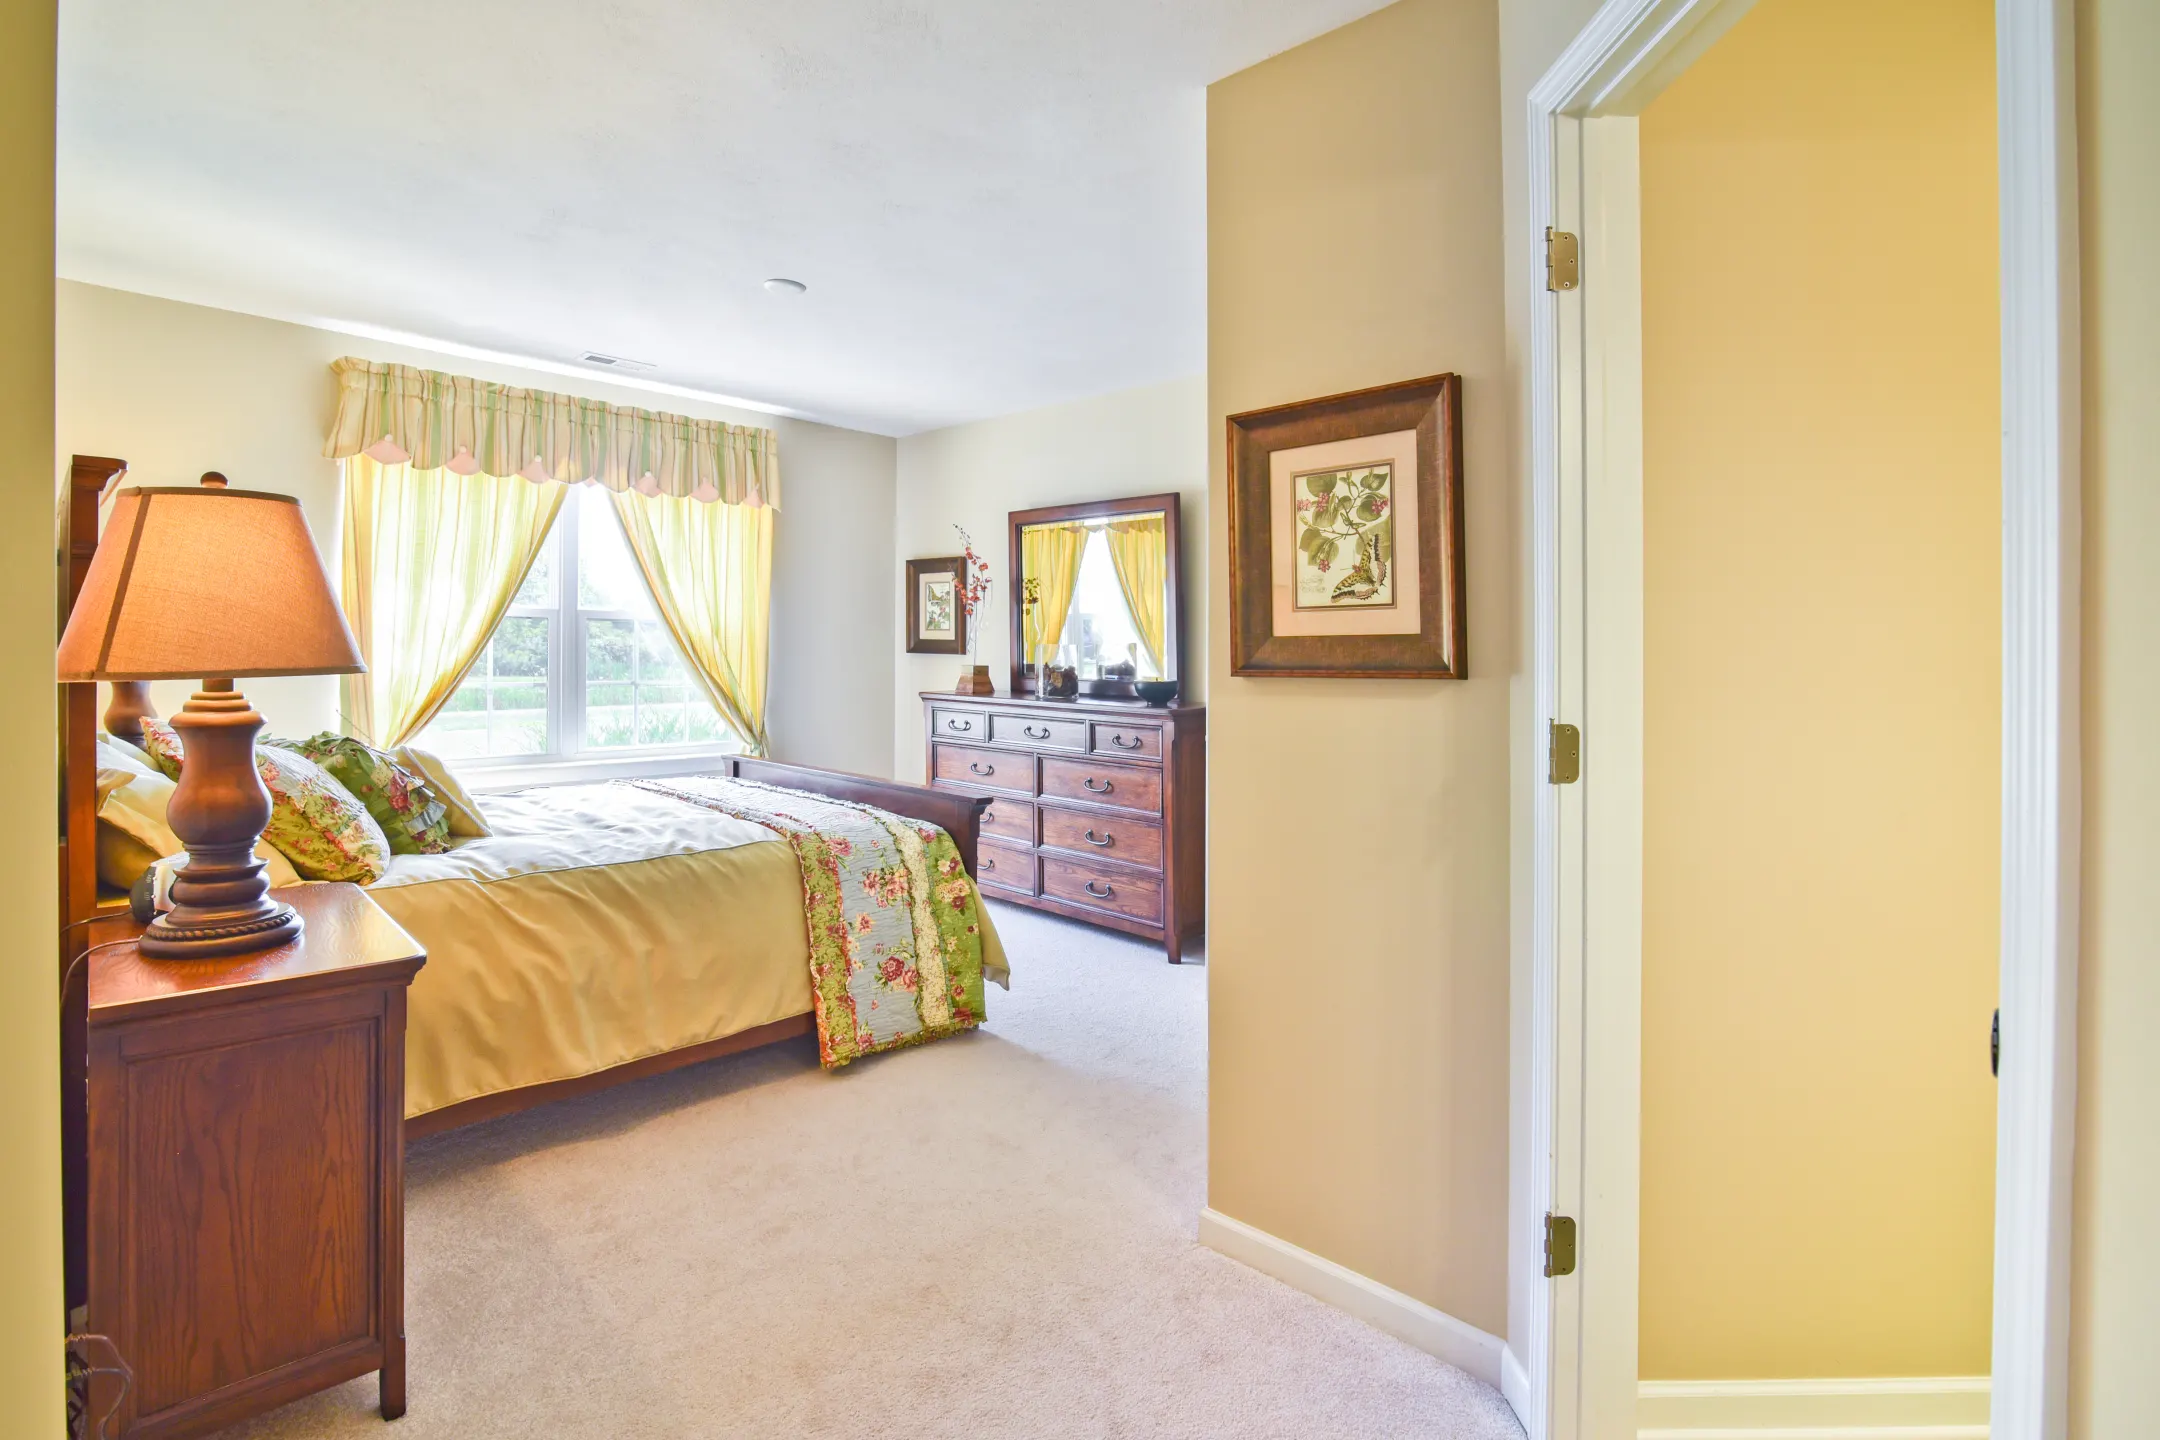 Bedroom - The Fairways at Timber Banks - Baldwinsville, NY